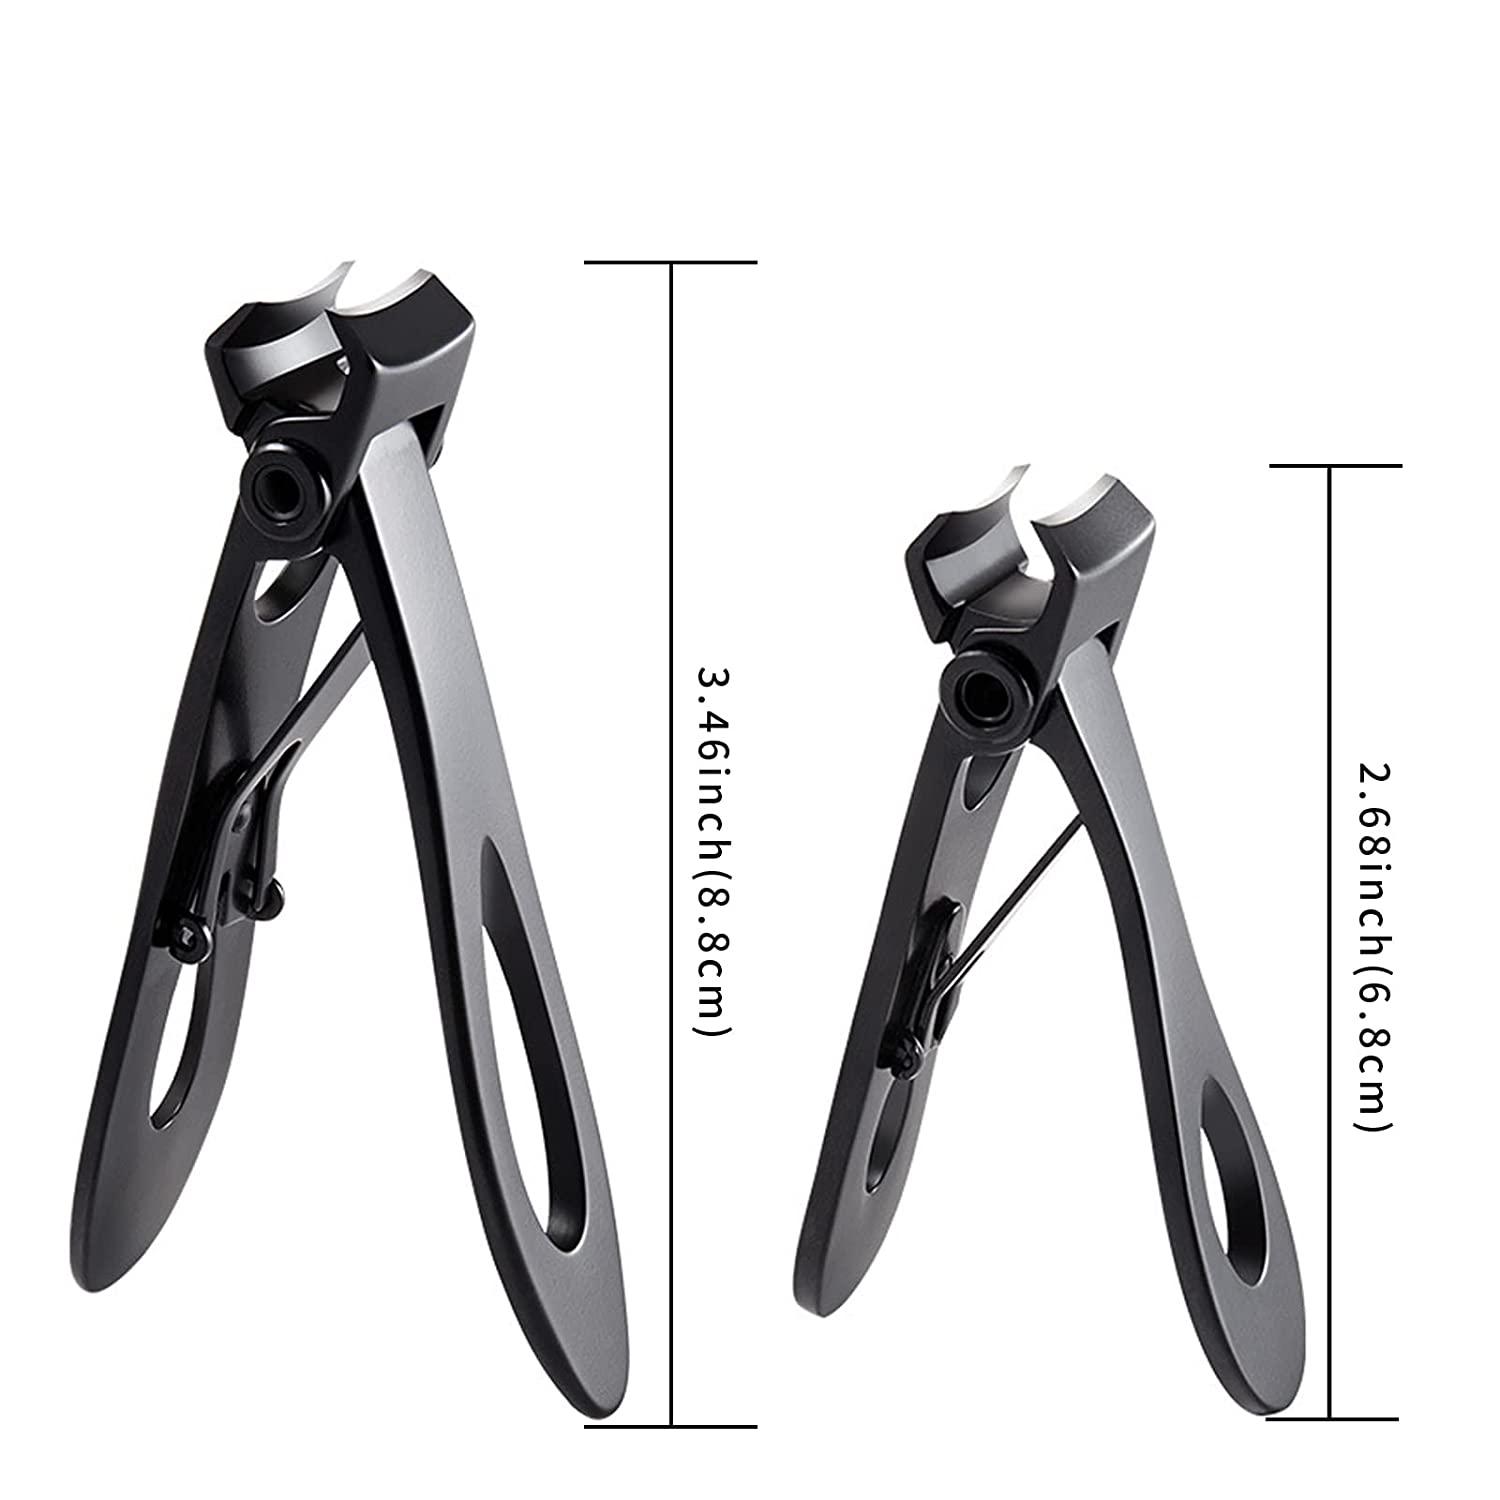 Venoteck Nail Clippers for Thick Nails,Fingernail Toenail Clippers